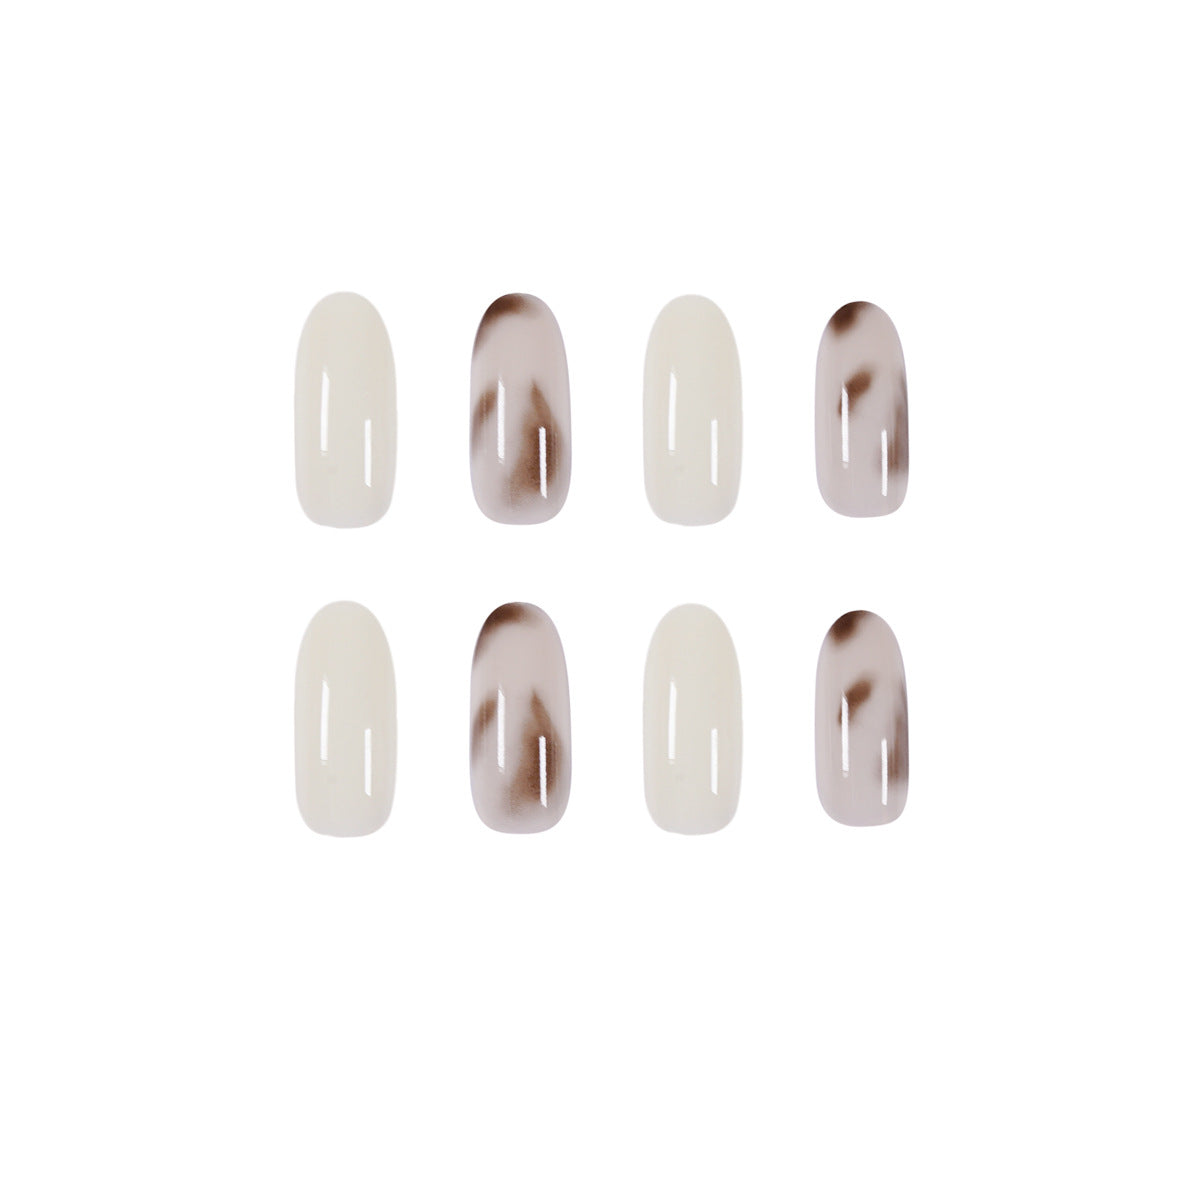 Nude Transparent Jade Leopard Print Wear Manicure Removable Fake Nails - Mes Faux Ongles